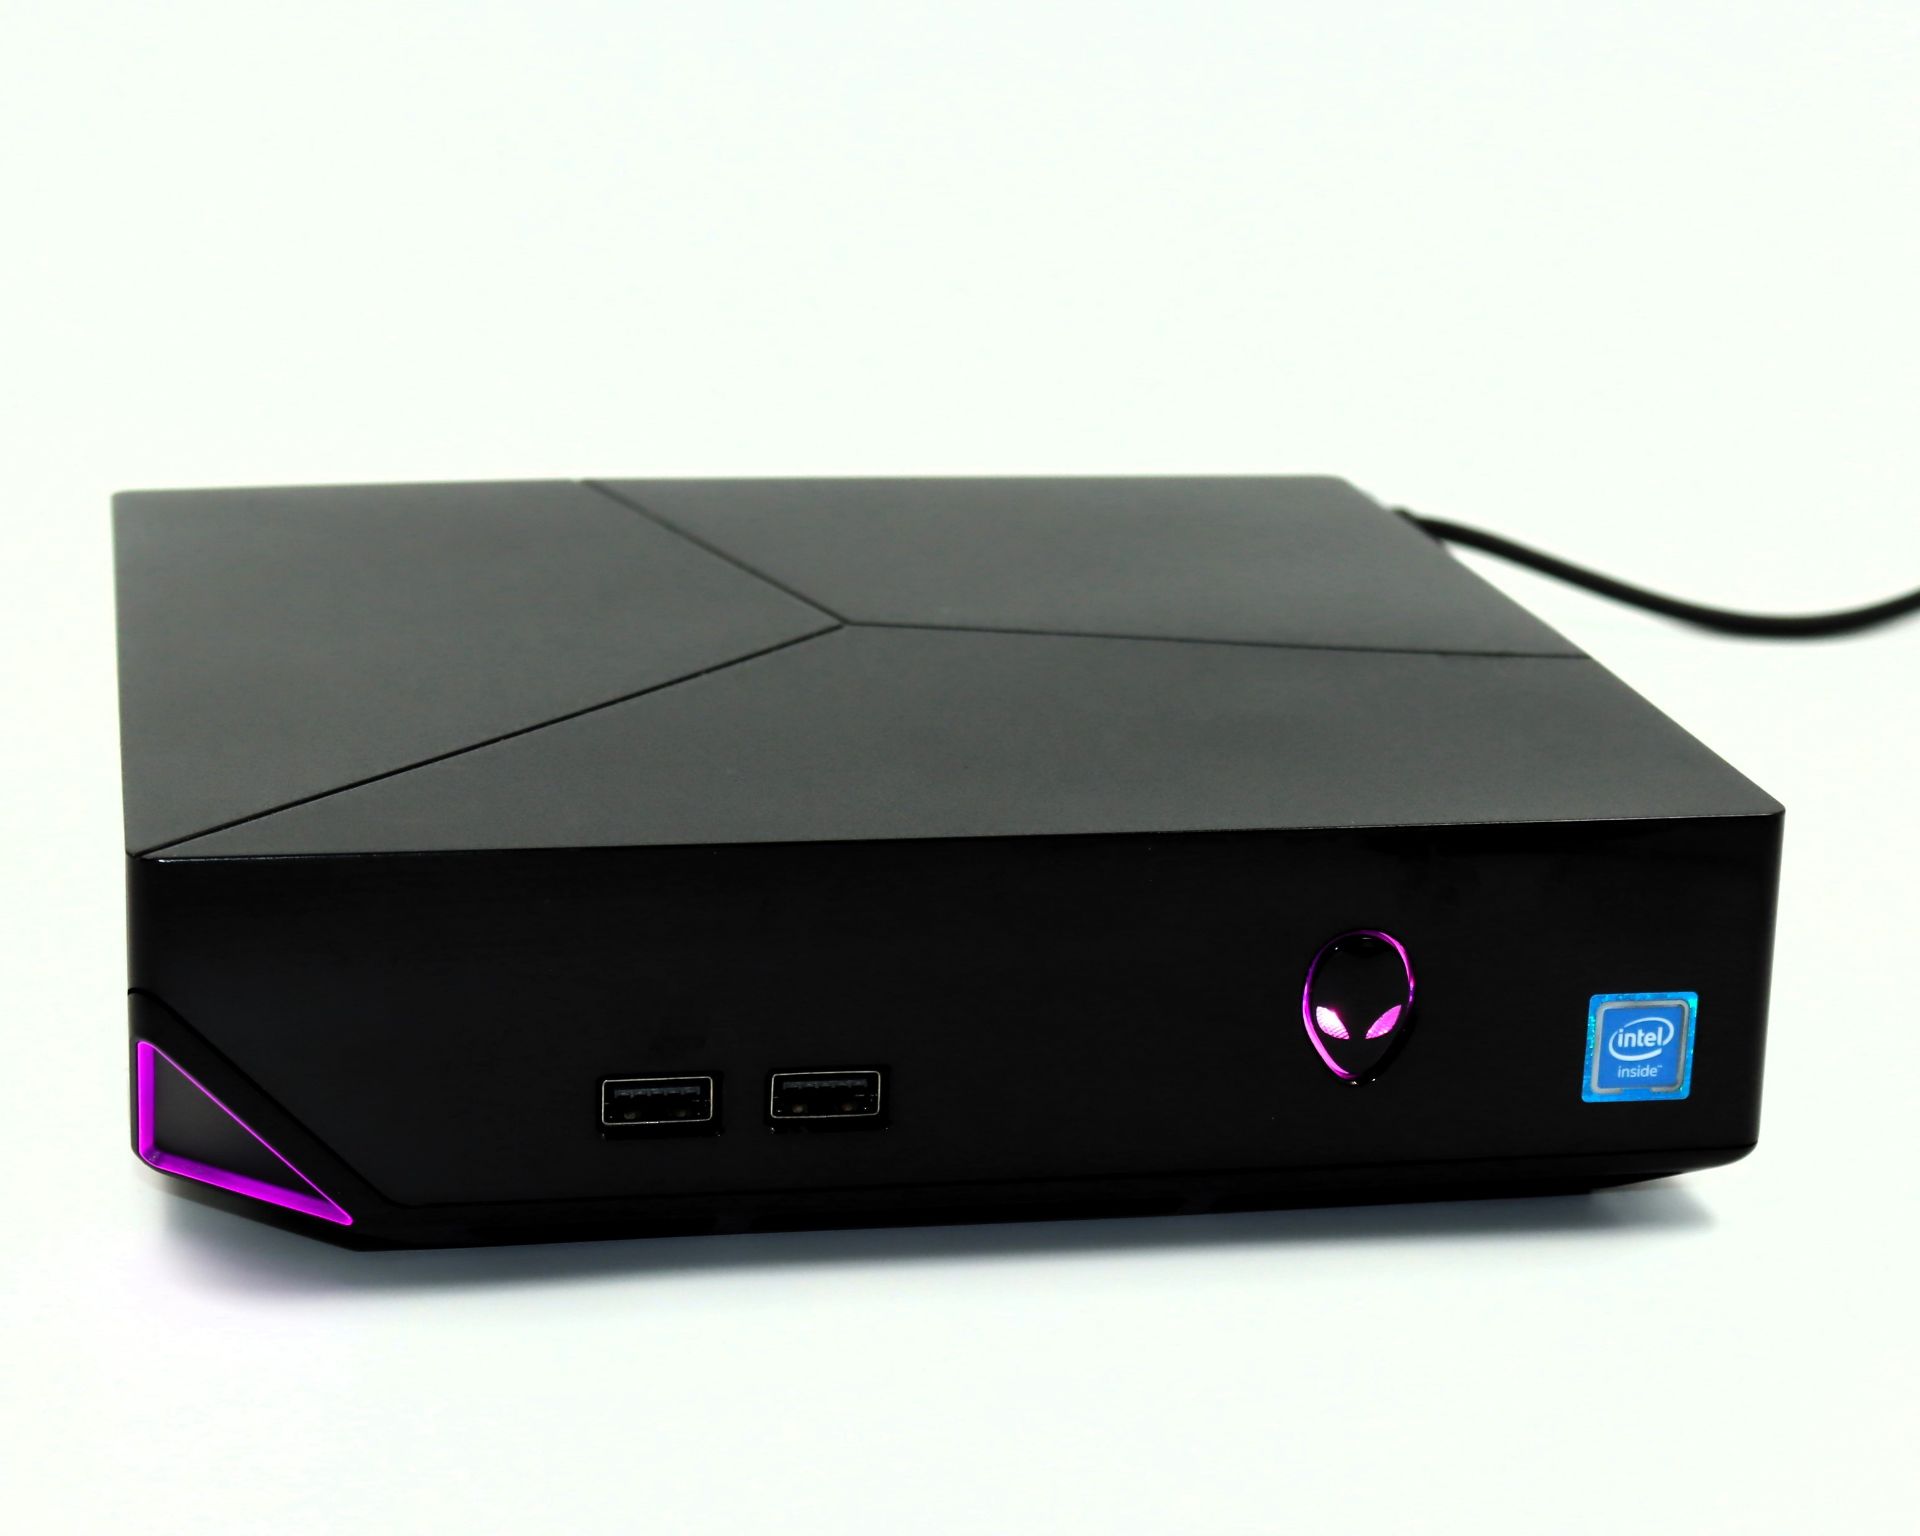 A pre-owned Alienware Alpha R2 Desktop PC with Intel Core i5-6400T 2.20GHz, 8GB RAM, NVIDIA GeForce